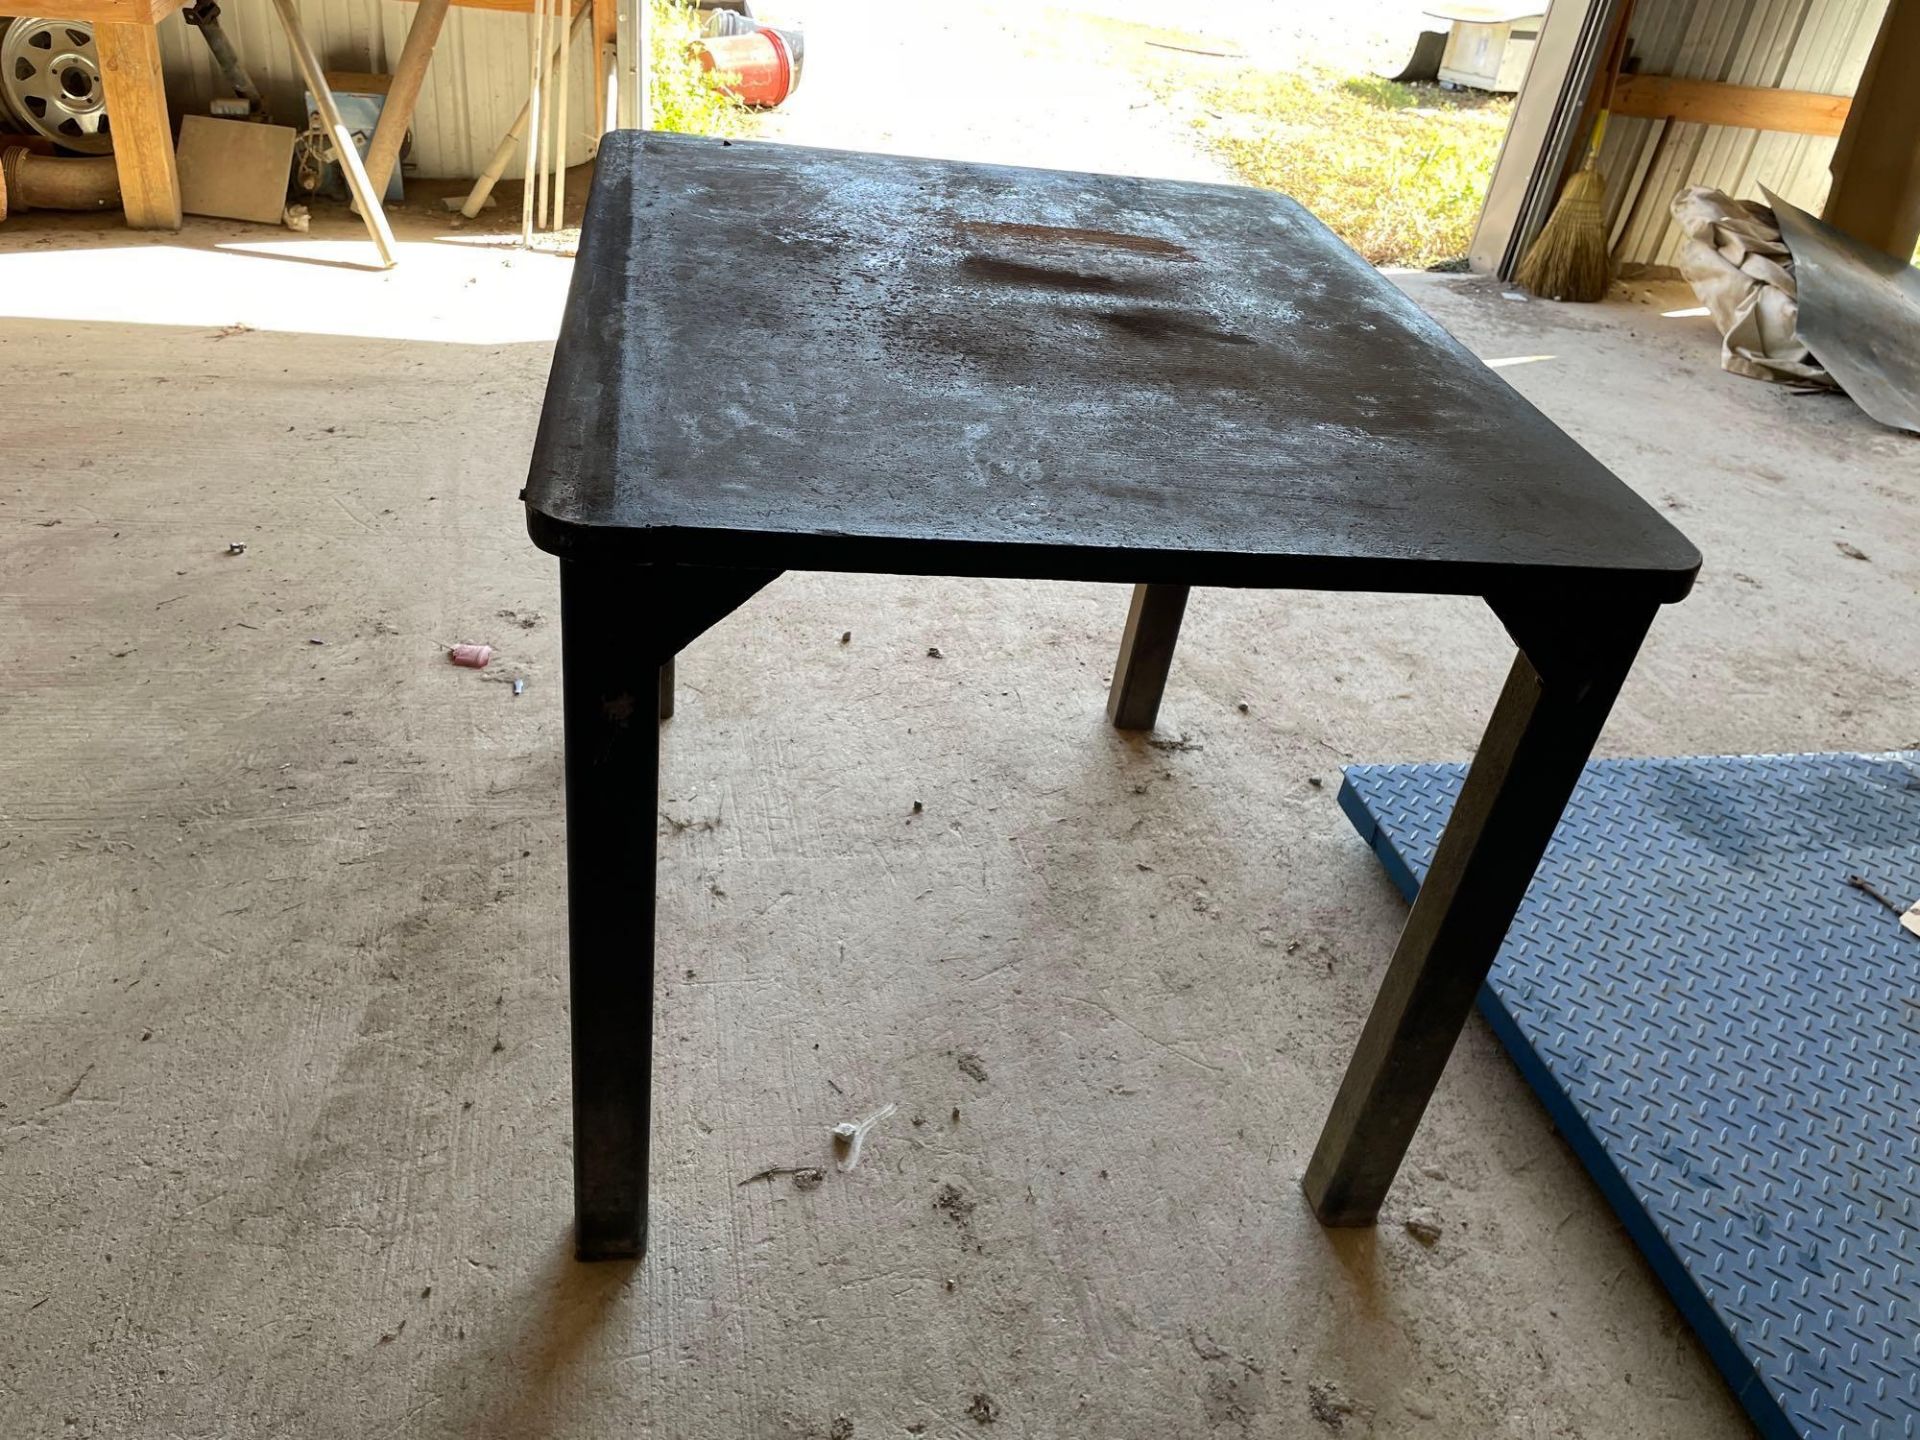 45” X 39” X 36” Heavy Duty Metal Table, 1 1/4” Solid Metal Top - Image 3 of 3